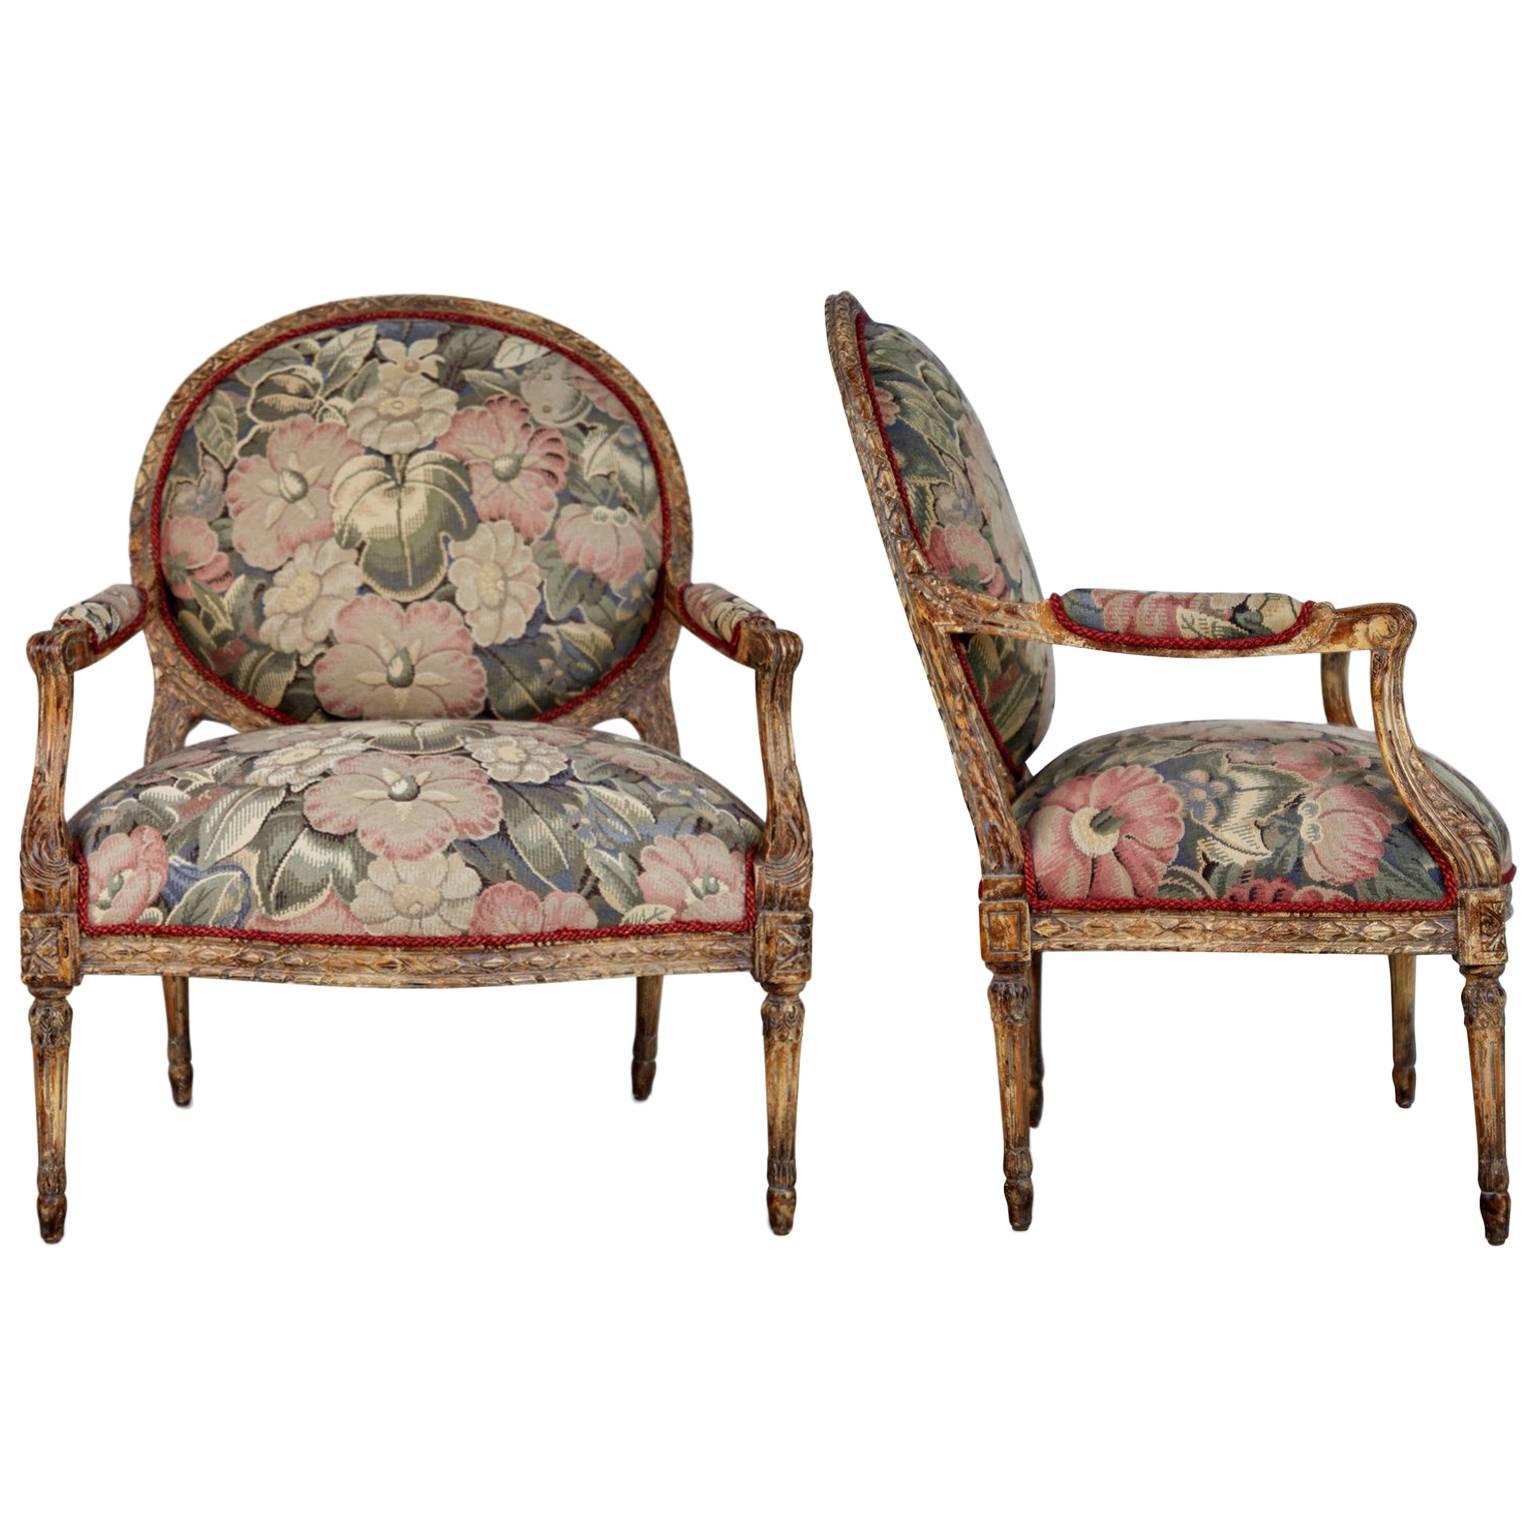 Pair of Louis XVI Style Armchairs with Tapestry Floral Fabric *MOVING SALE*